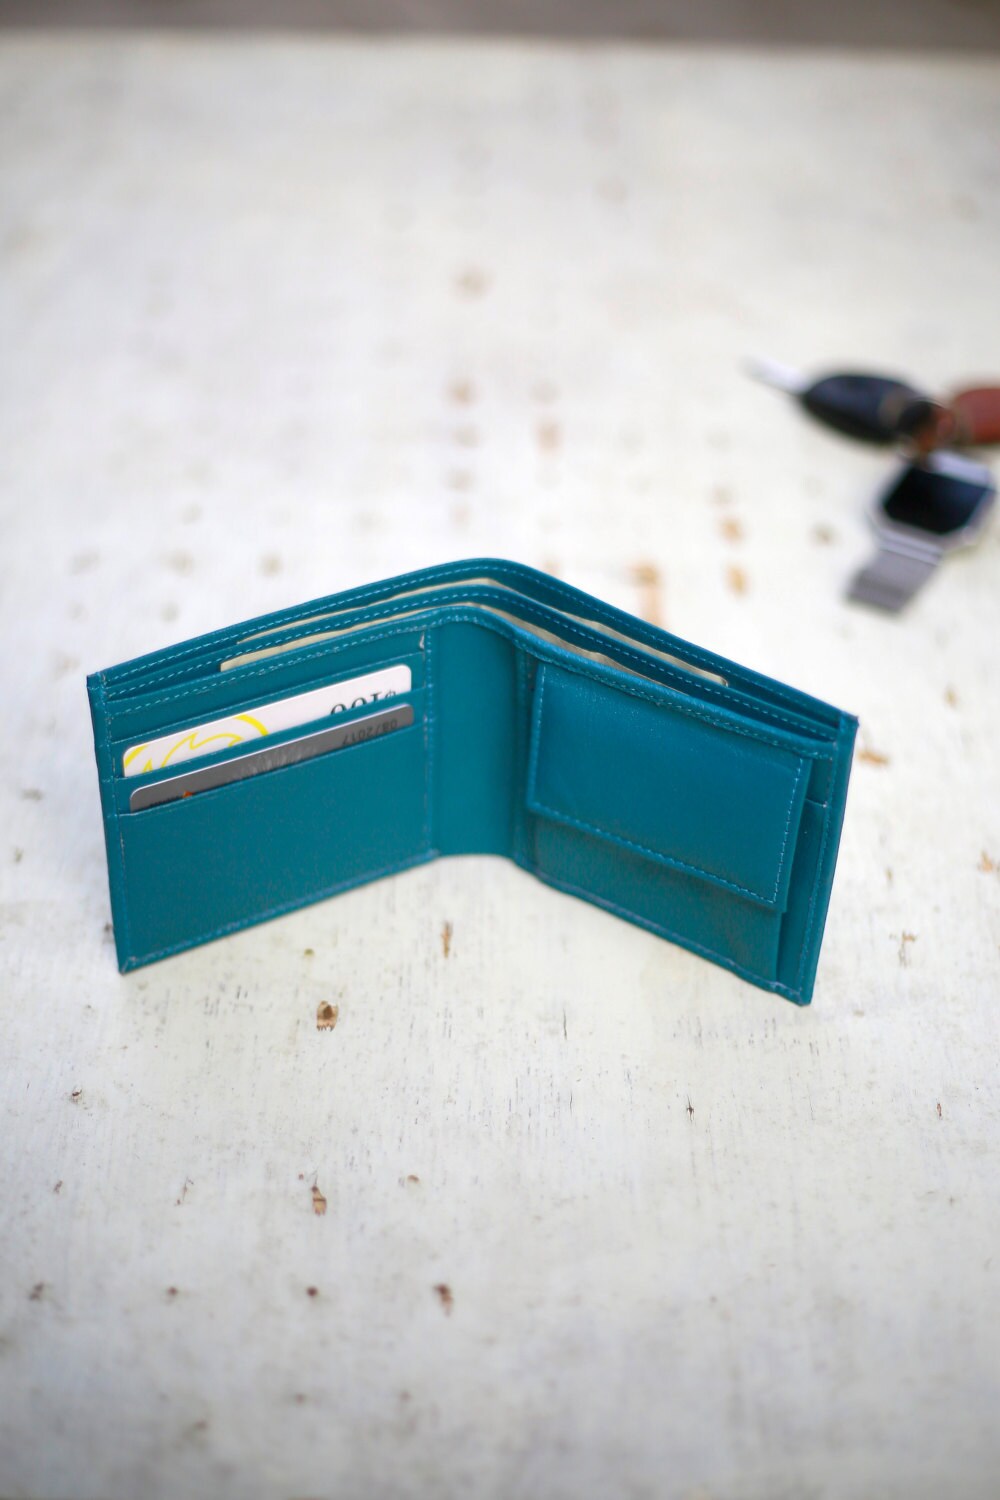 Turquoise Leather wallet with Coin Pocket,  gifts for him,groomsmen gifts, wedding gifts, gift for her, Birthday gift, anniversary  gift